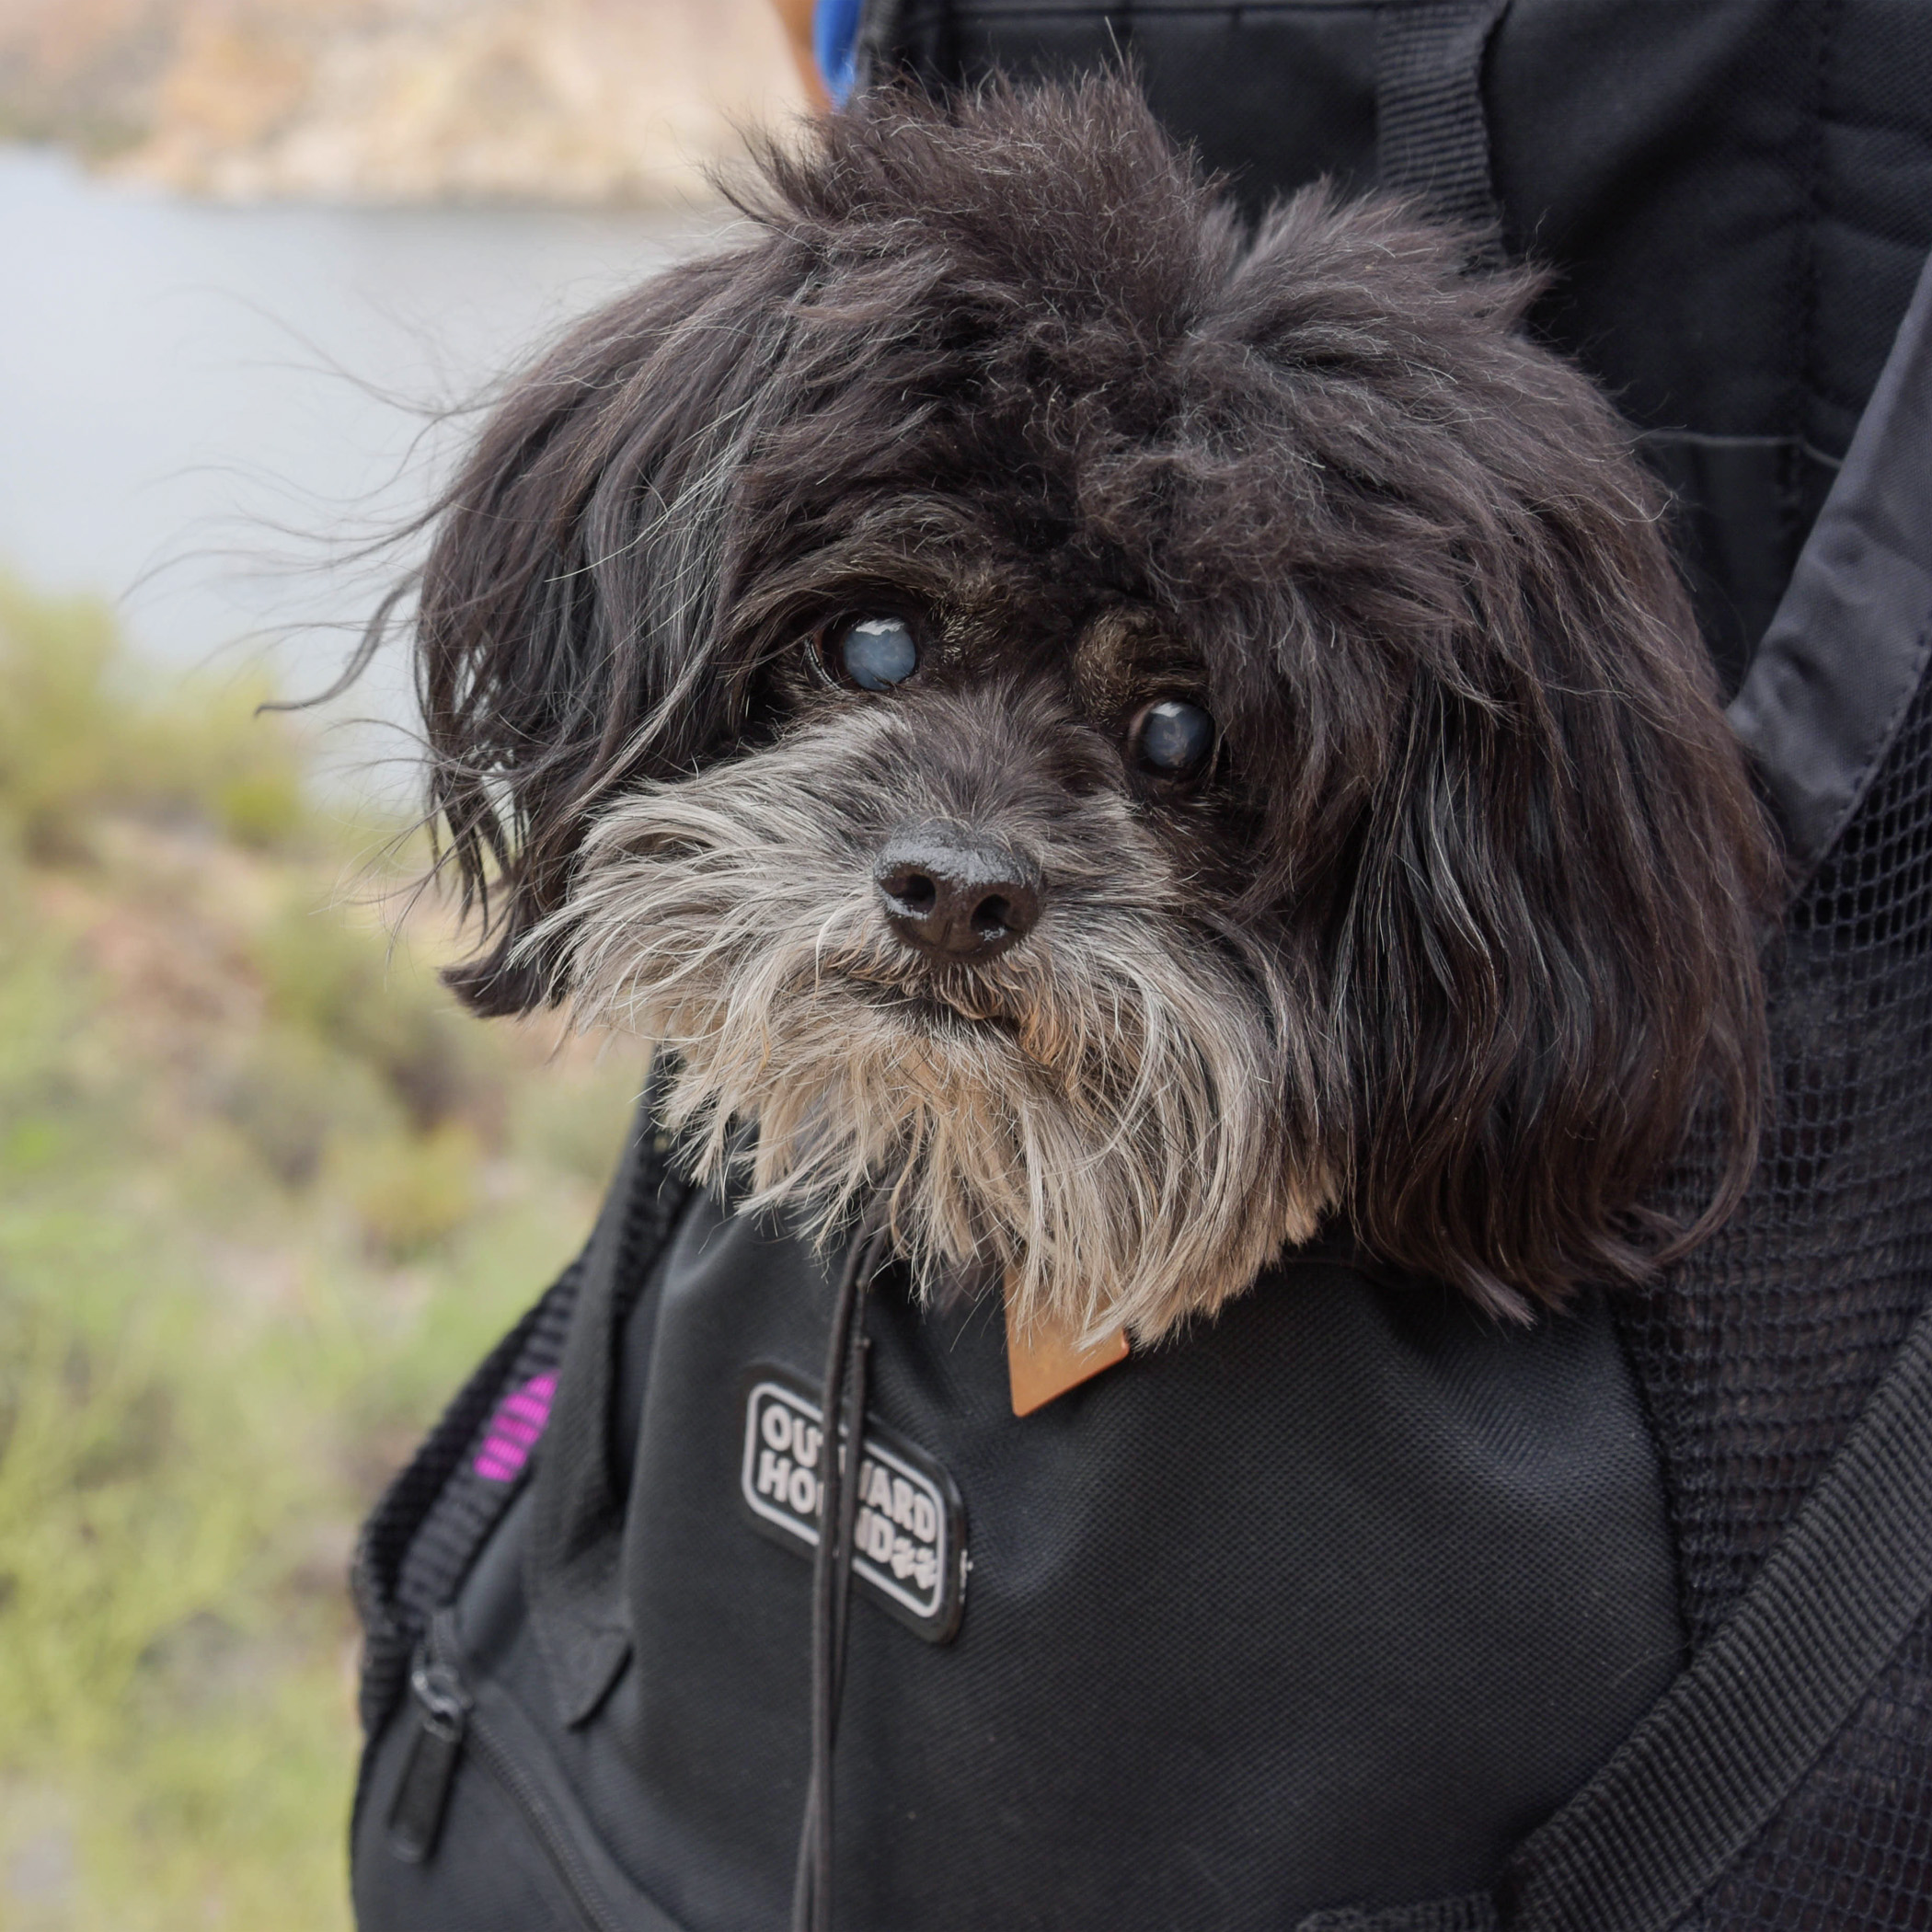  We attract quite a bit of attention when we’re out hiking. Usually, the people we come upon see Bruiser &amp; Pebbles hiking along with us. They’ll ooh and aah over the little fluffy dogs hiking…especially if they’re wearing their boots, and then ev